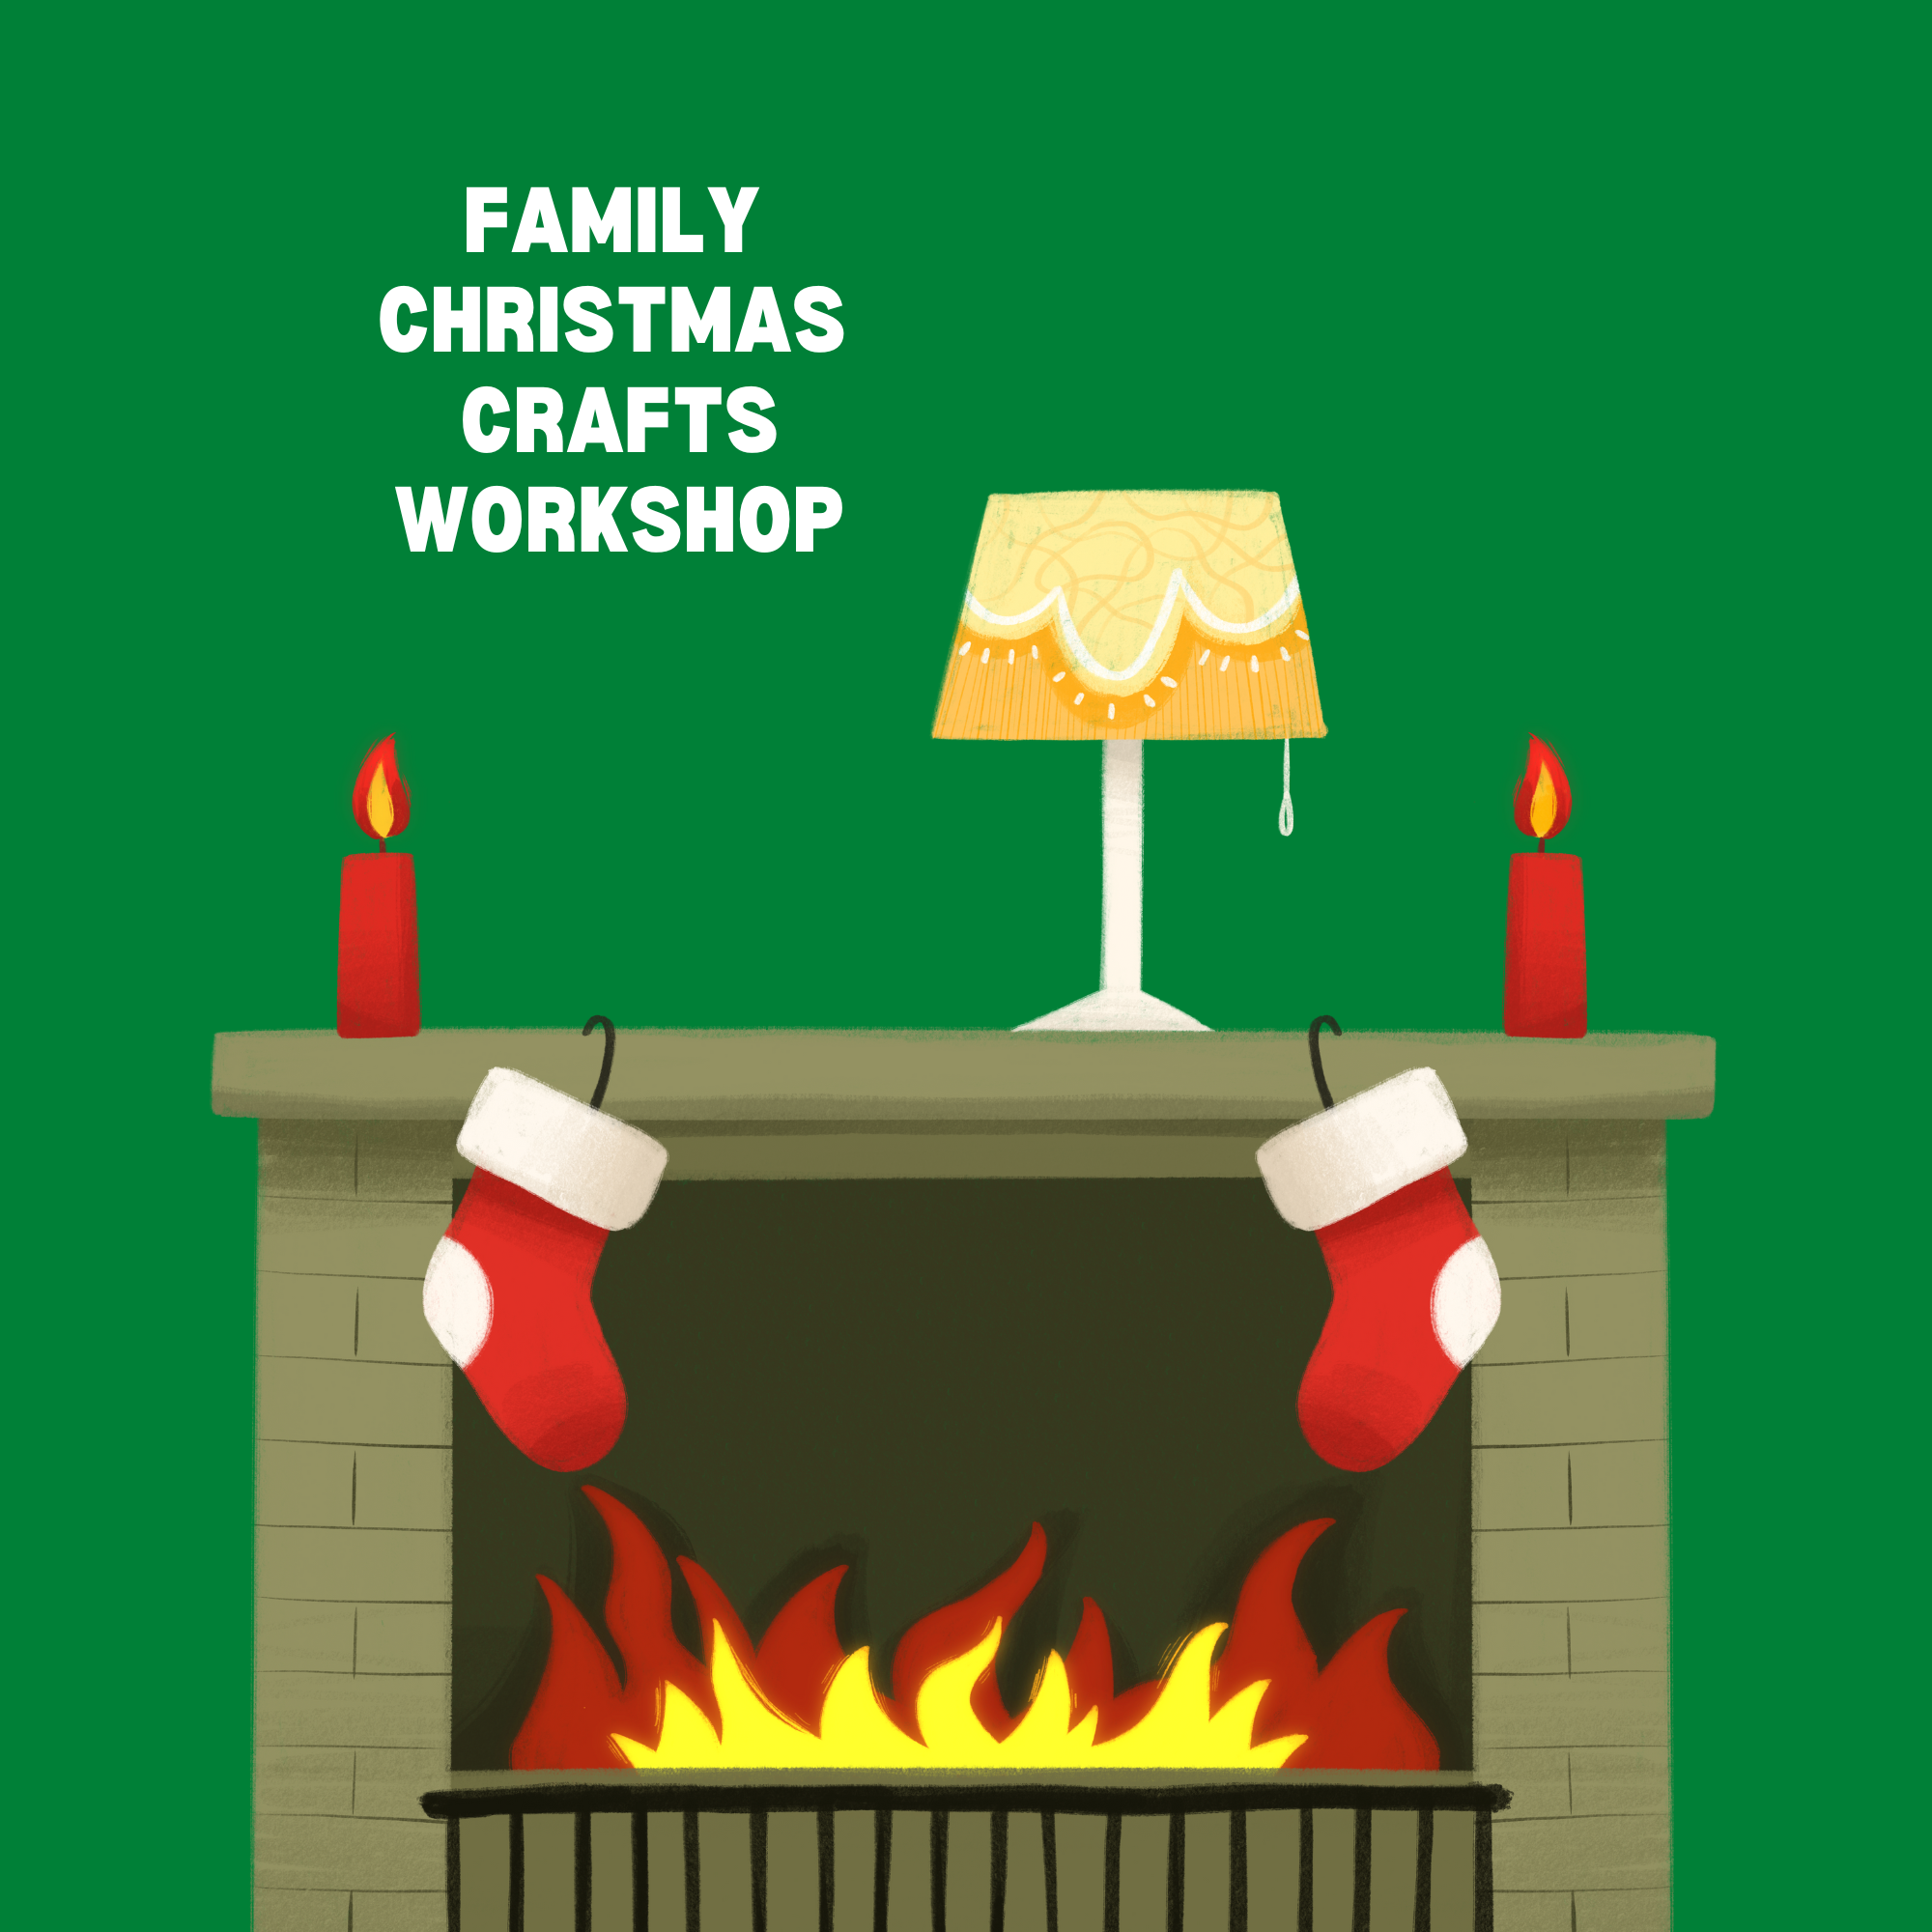 Family Christmas Crafts Workshop at Ombersley Road 10th December